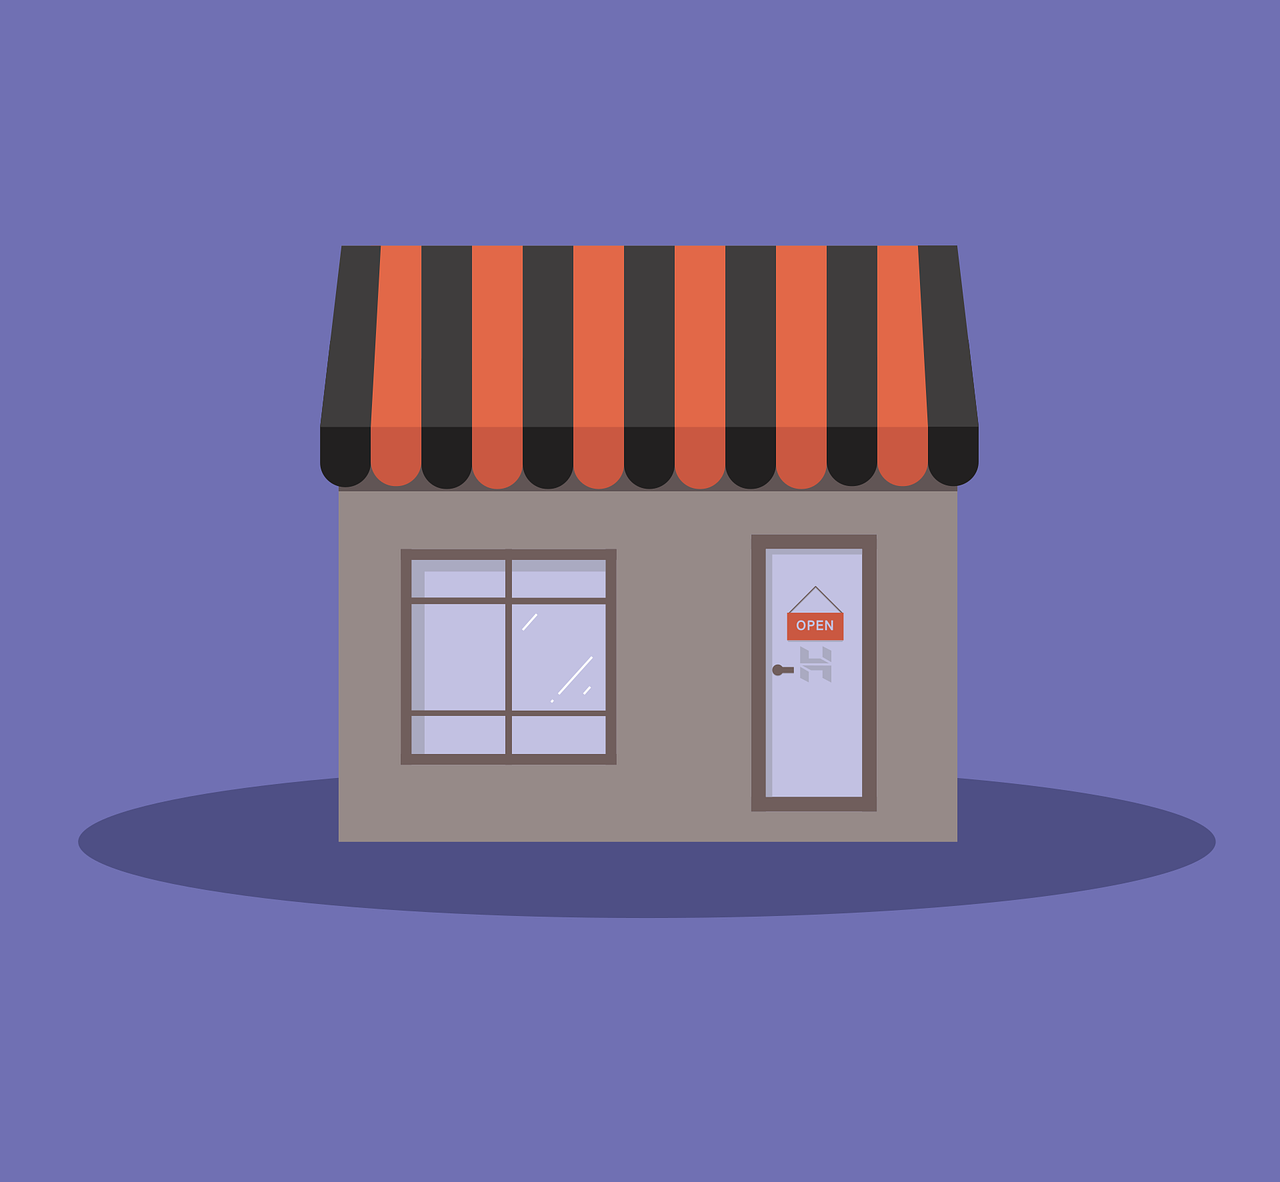 a small store with a red and black awning, conceptual art, dark flat color background, orange and purple color scheme, simple and clean illustration, background image